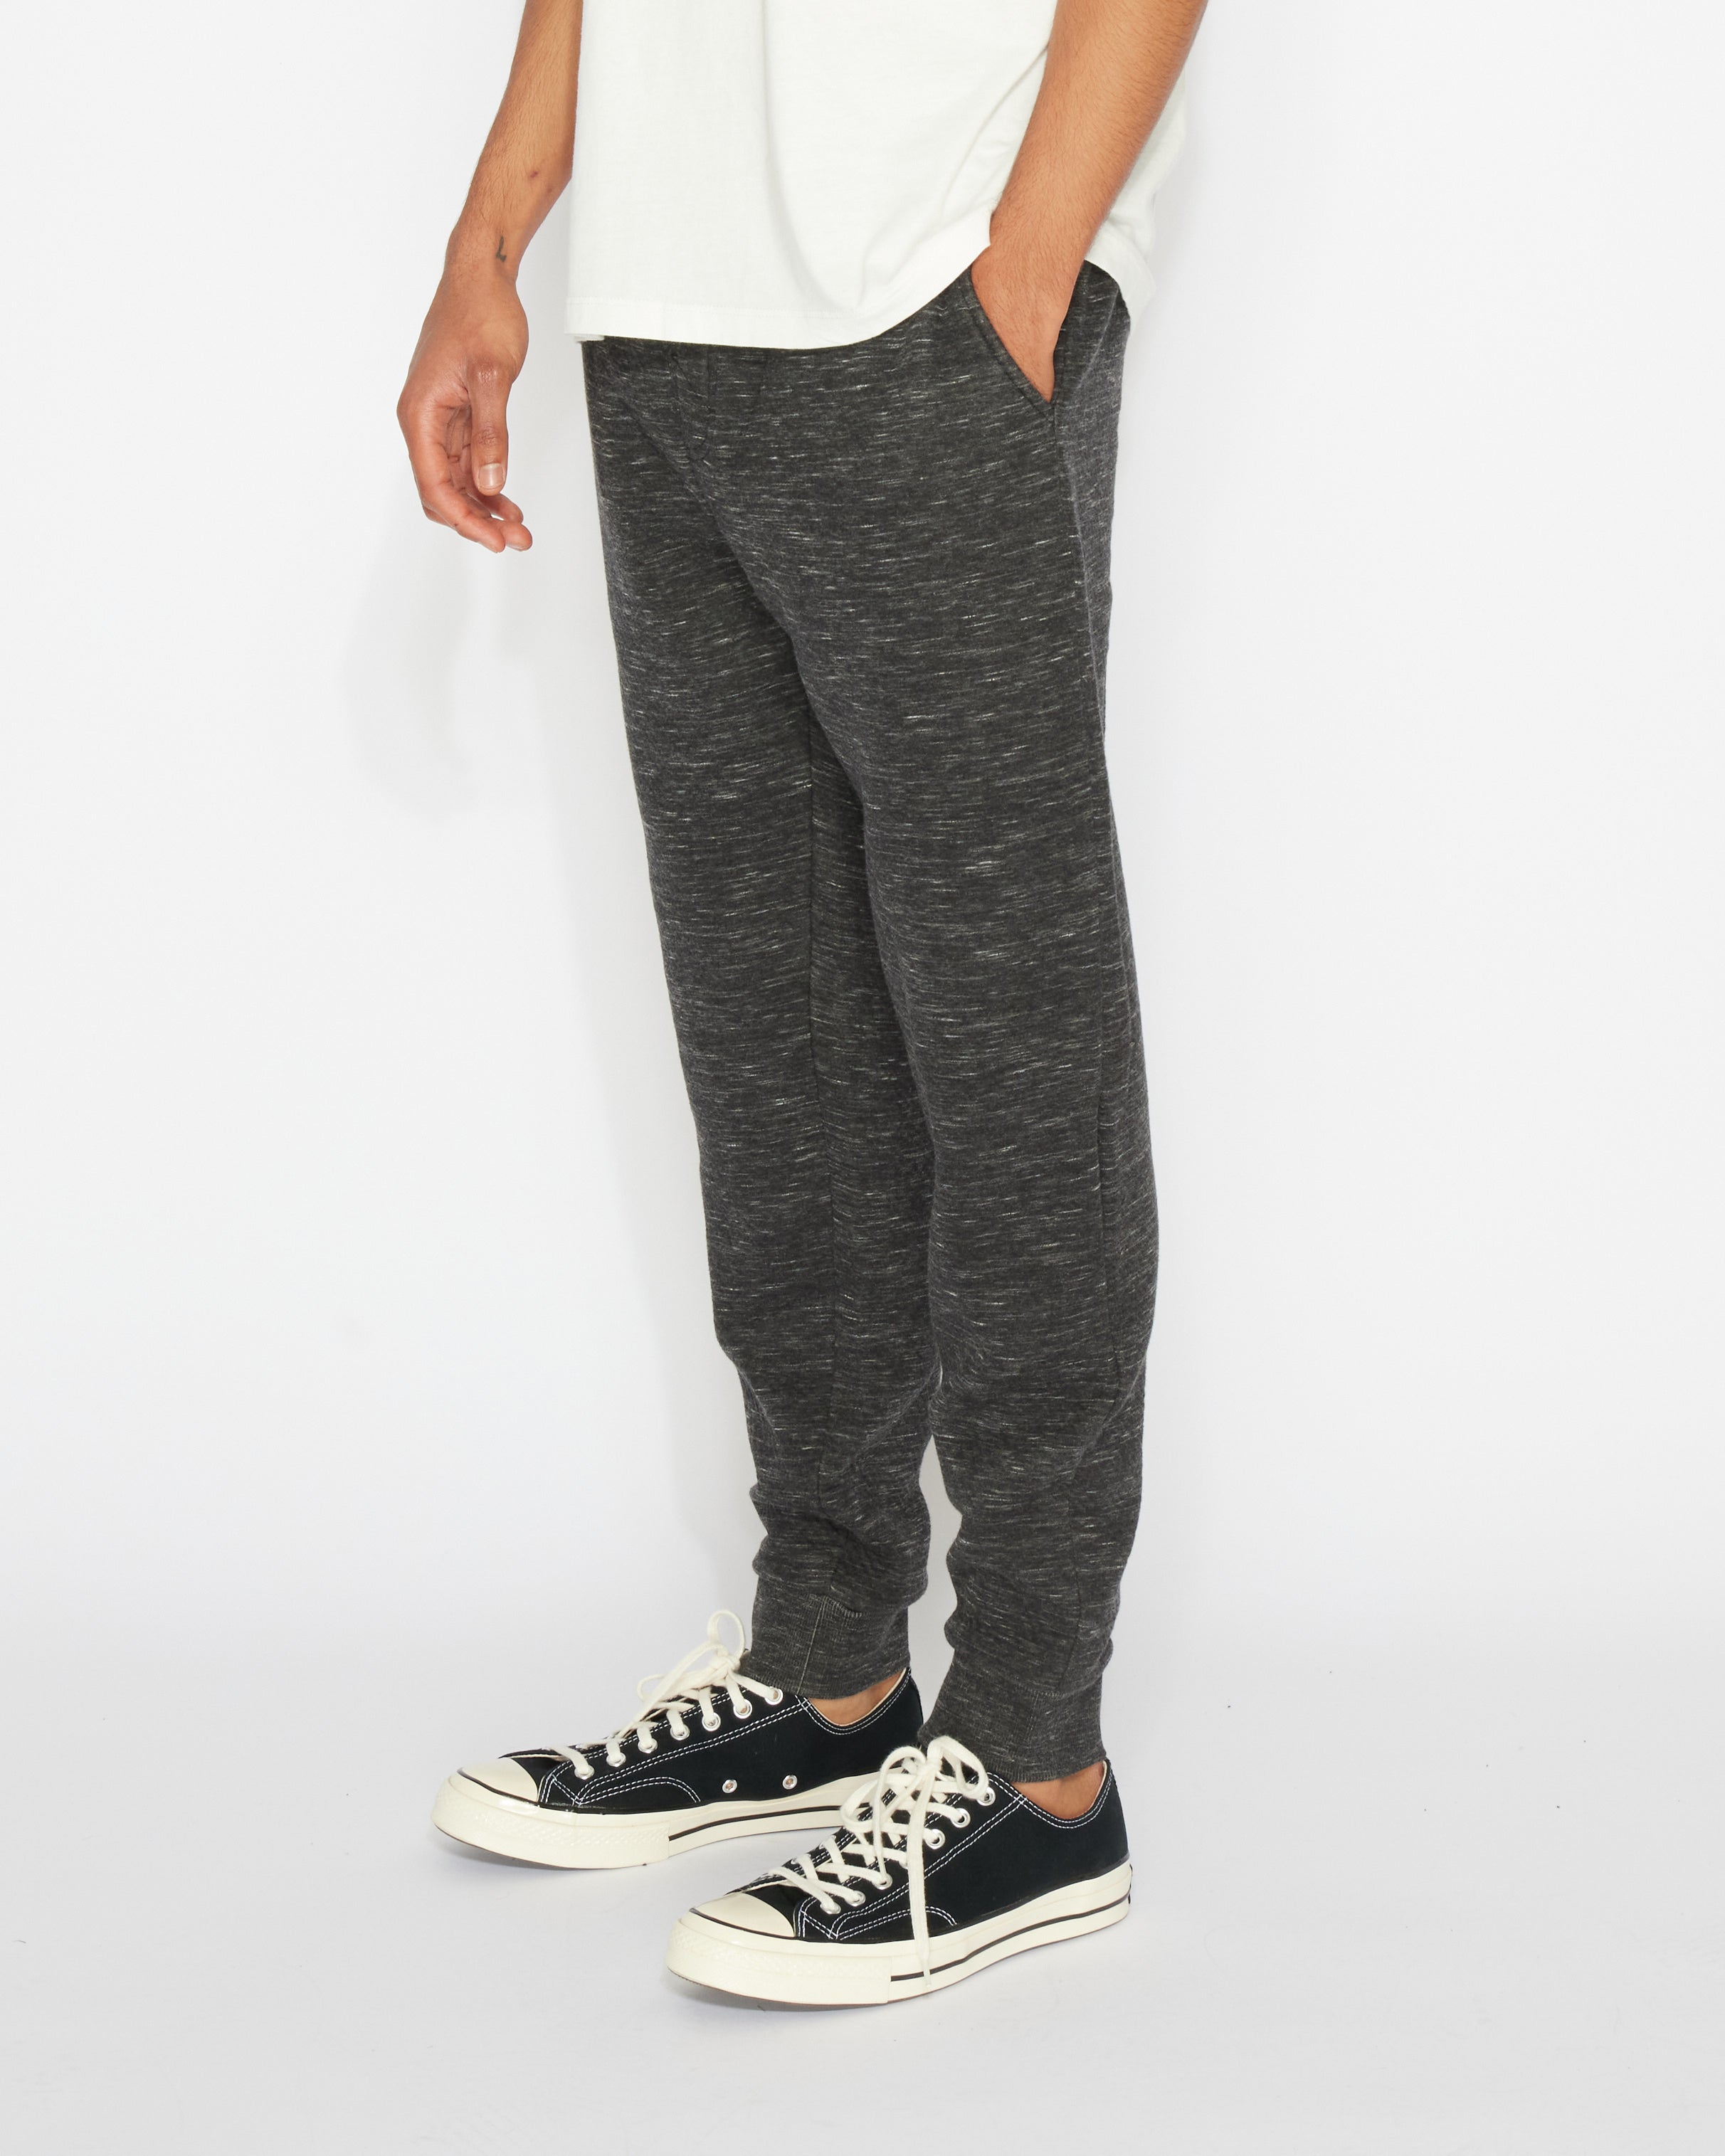 Primary Track Pant